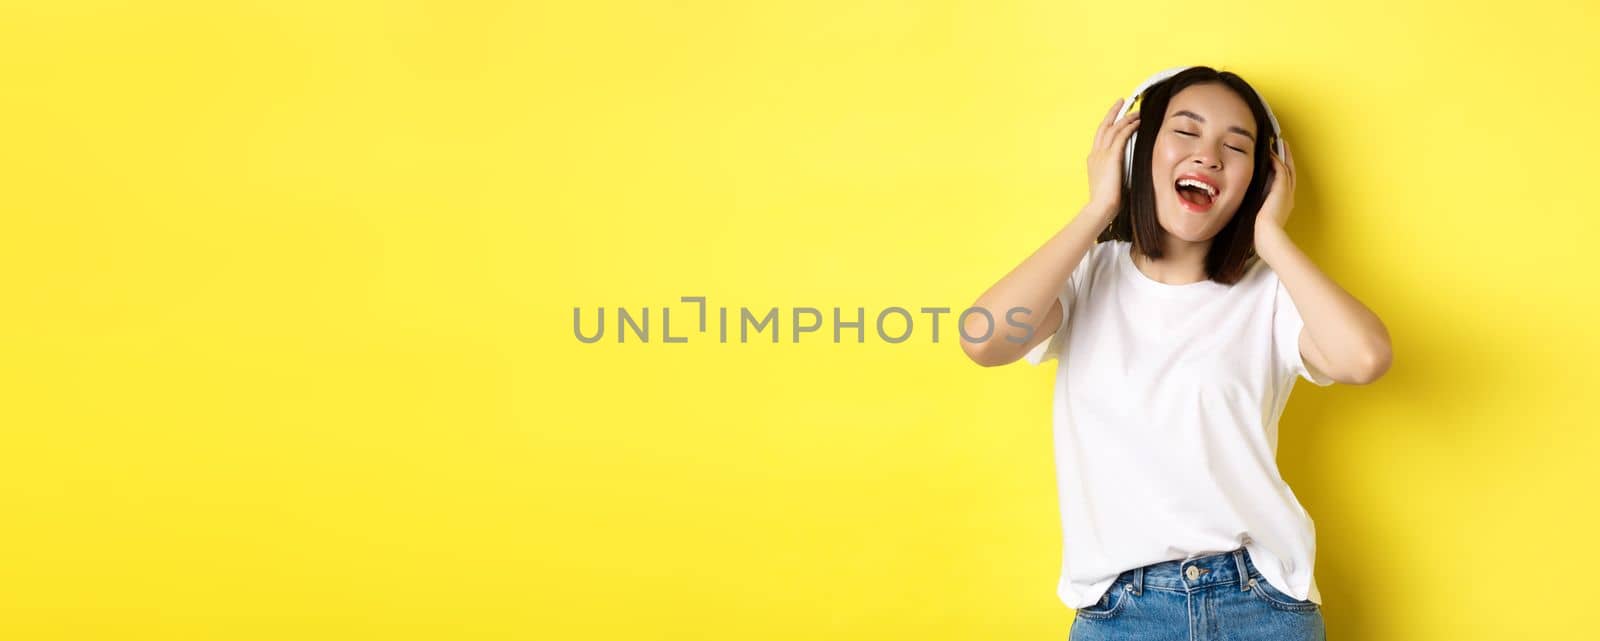 Attractive asian woman enjoying listening music in wireless headphones, smiling pleased and singing along, yellow background.